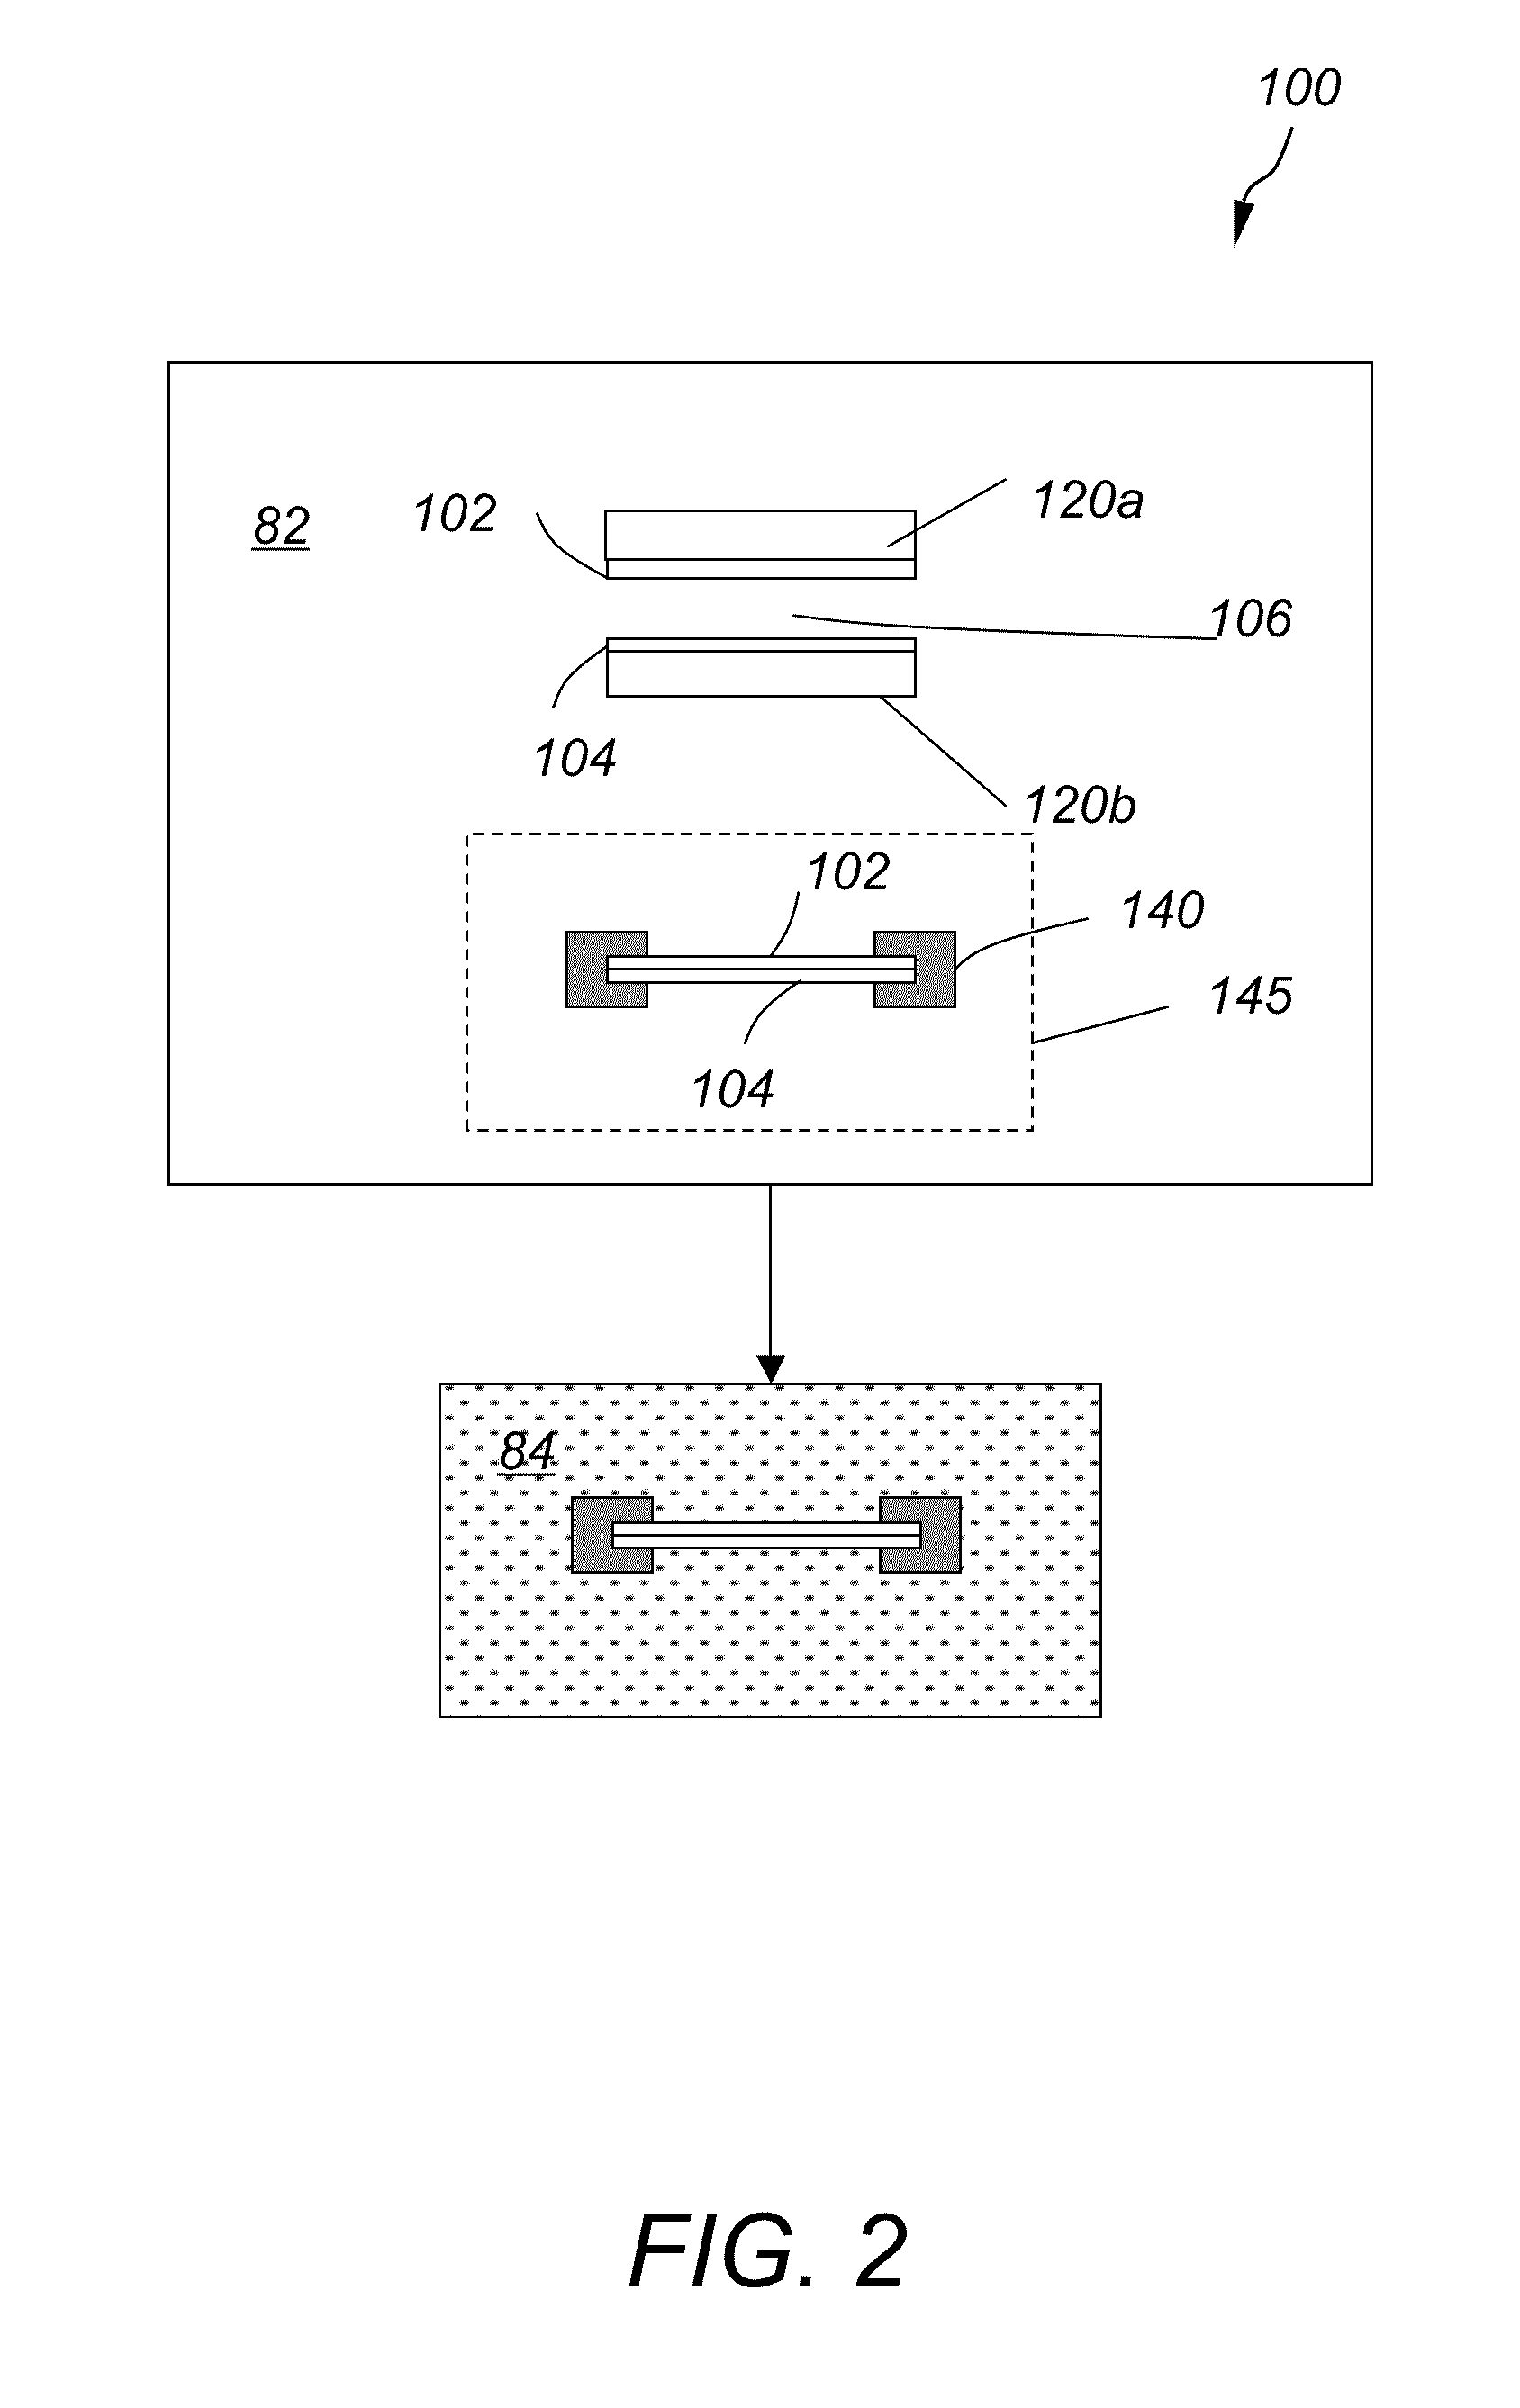 Method and apparatus for wafer bonding with enhanced wafer mating